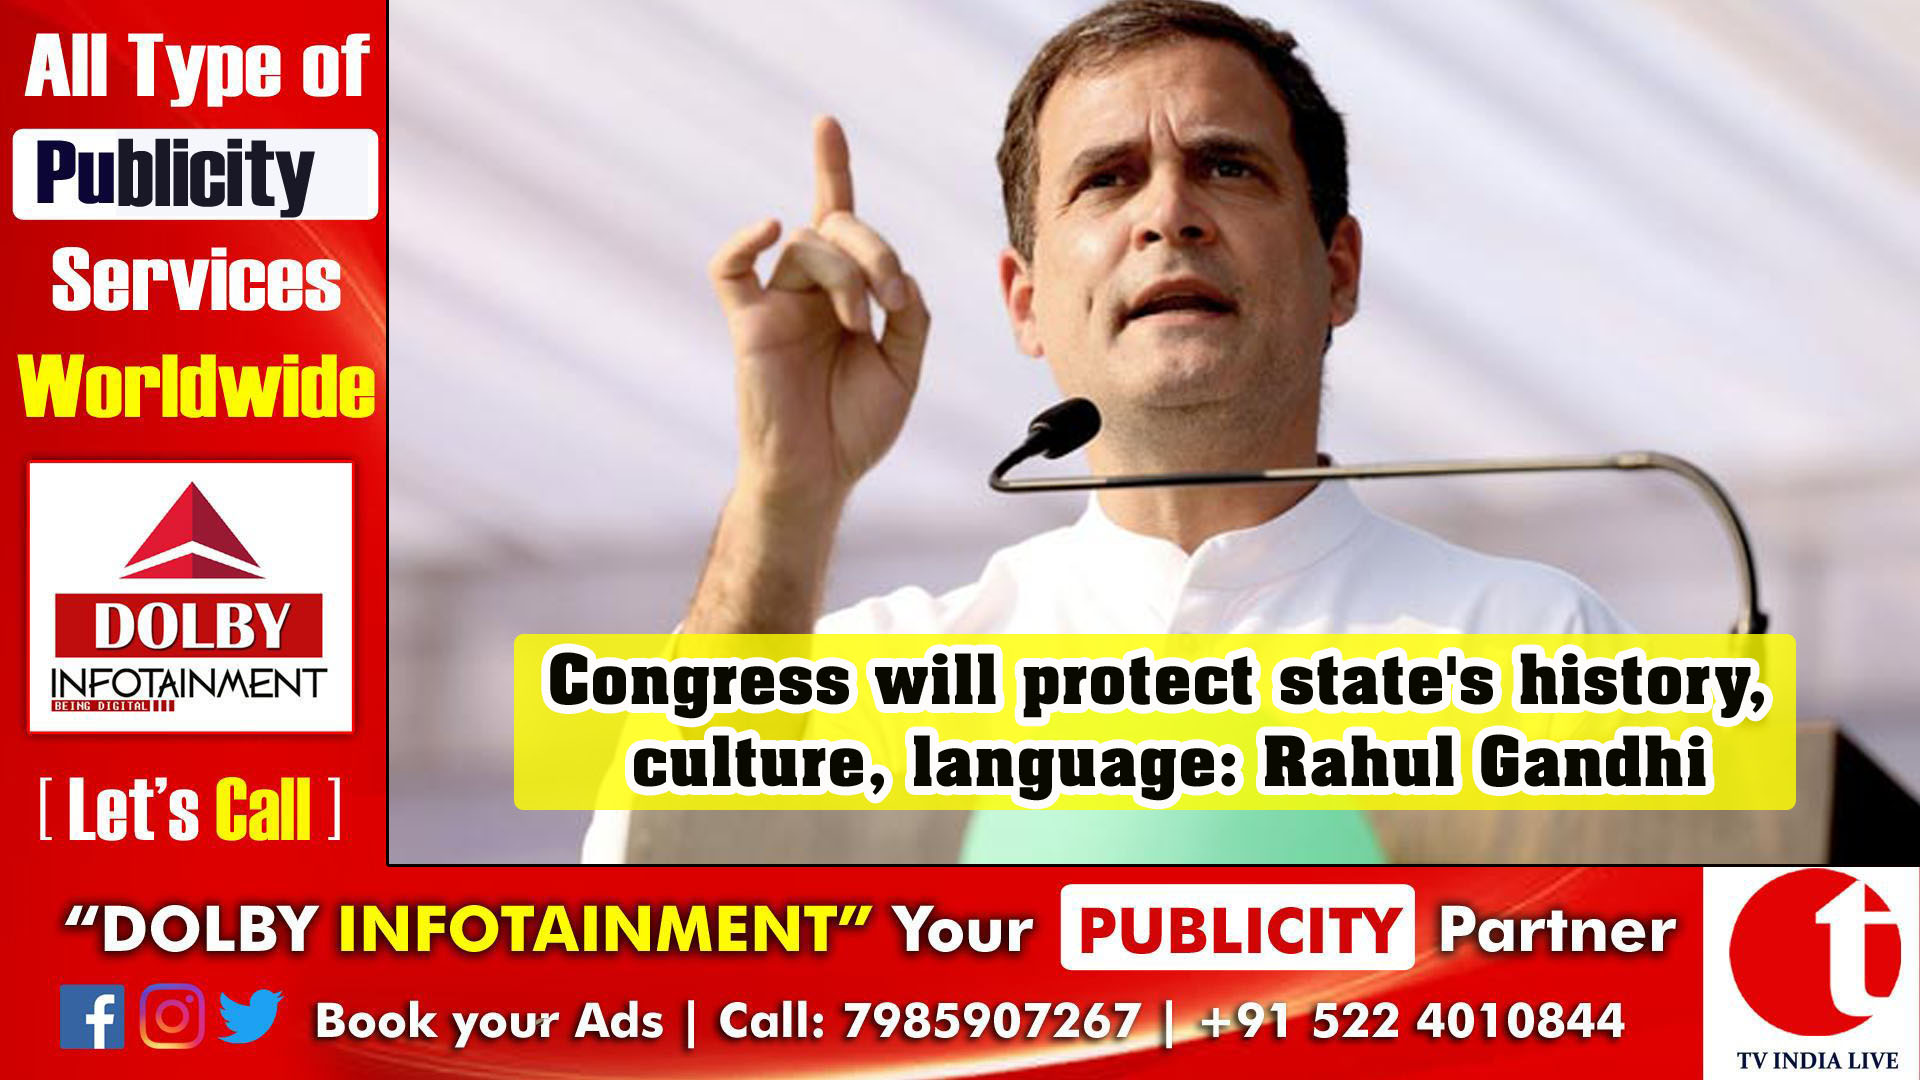 Congress will protect state's history, culture, language: Rahul Gandhi